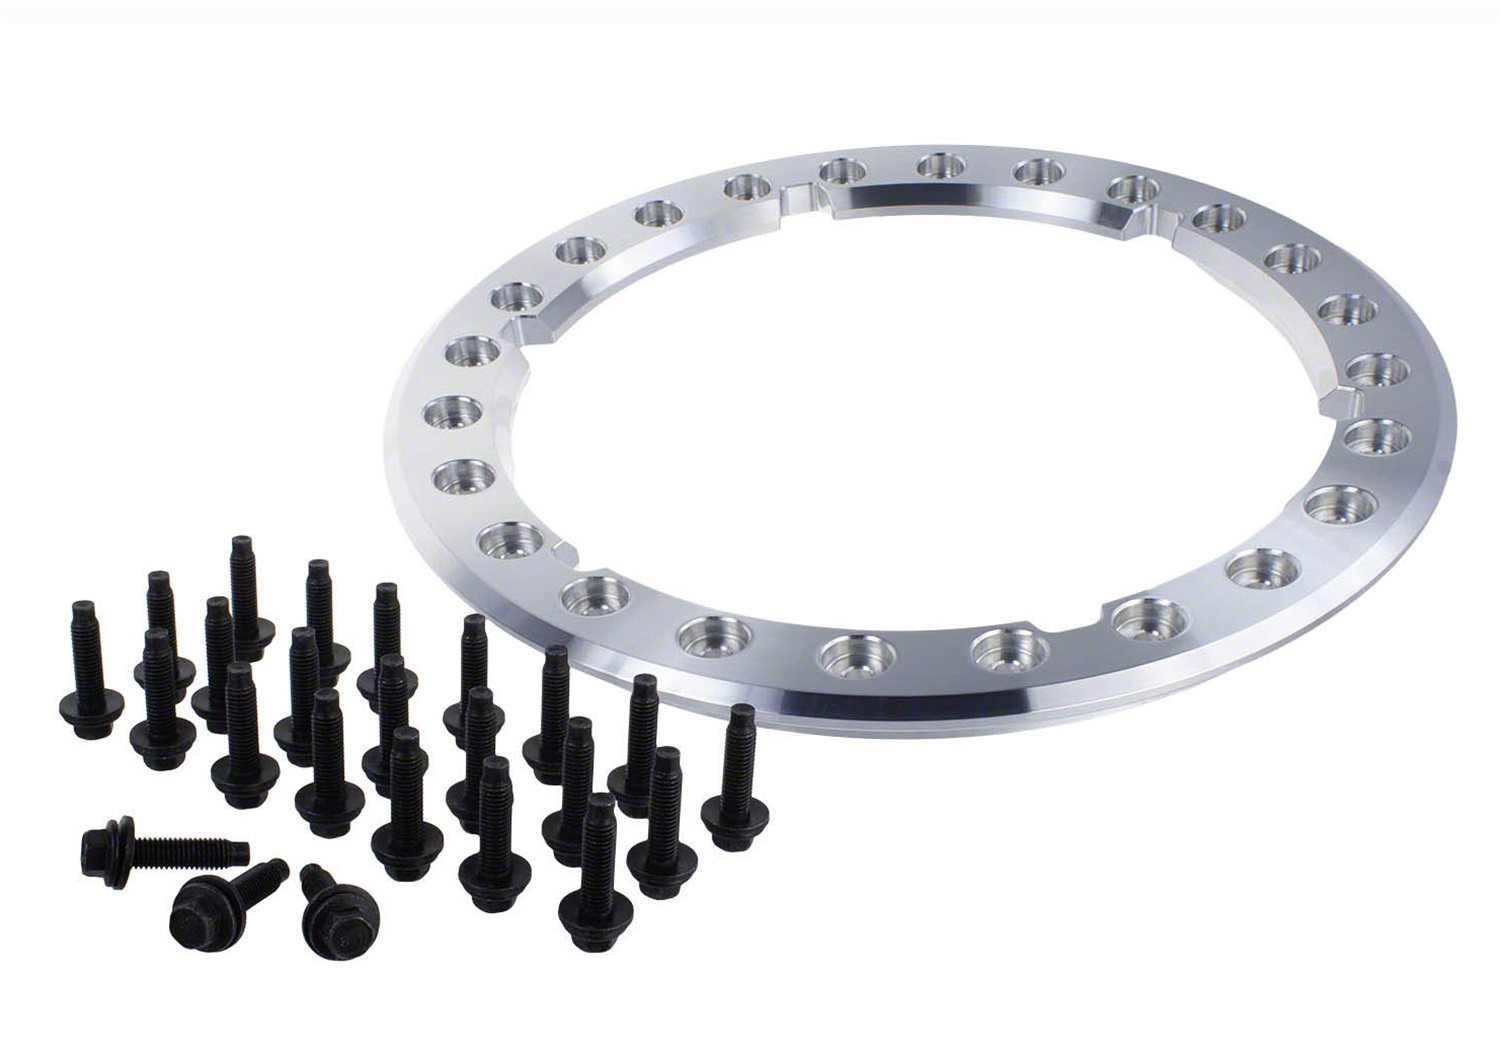 Ford Performance Parts M-1021-F15RB Bead Lock Ring Kit Fits 17-23 Bronco F-150